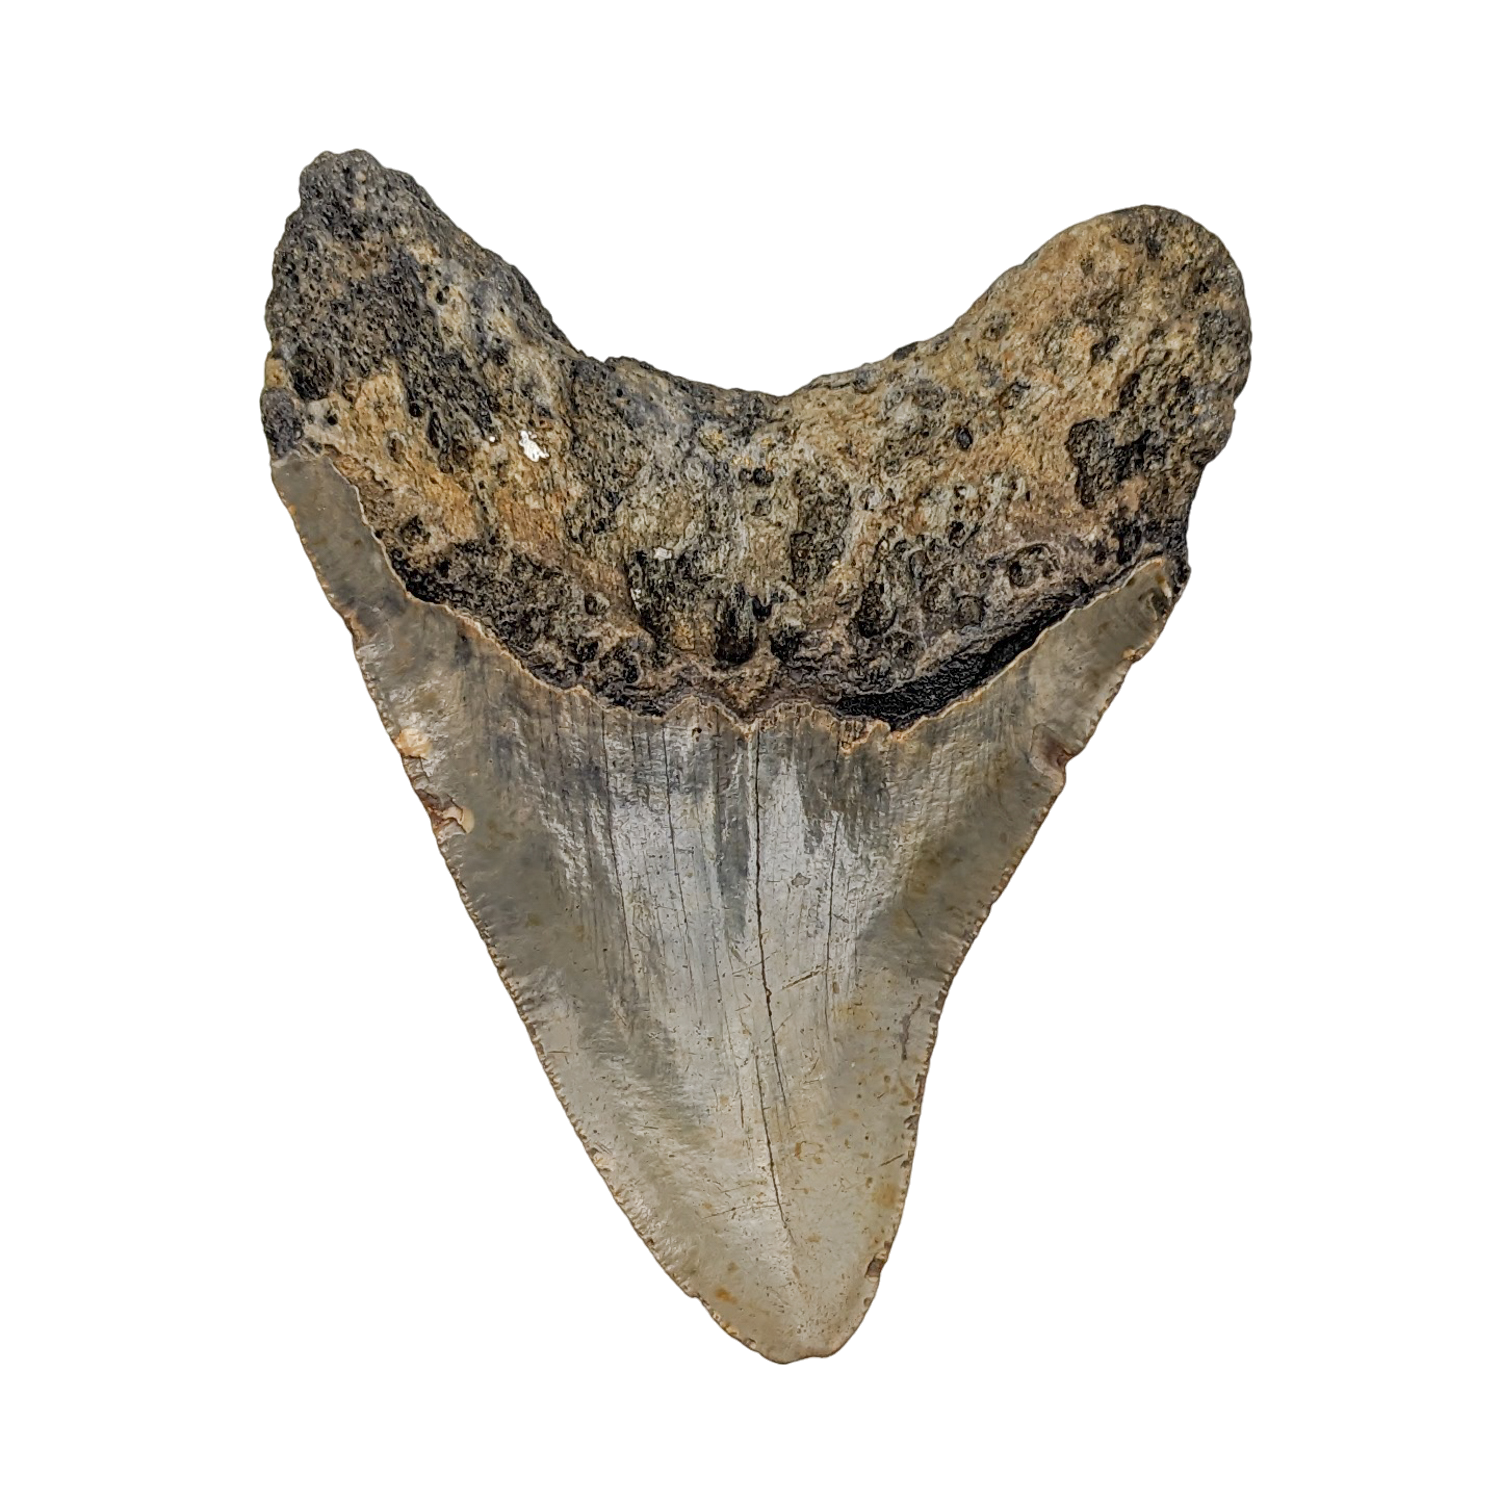 Authentic 4 3/4" Megalodon Shark Tooth Fossil